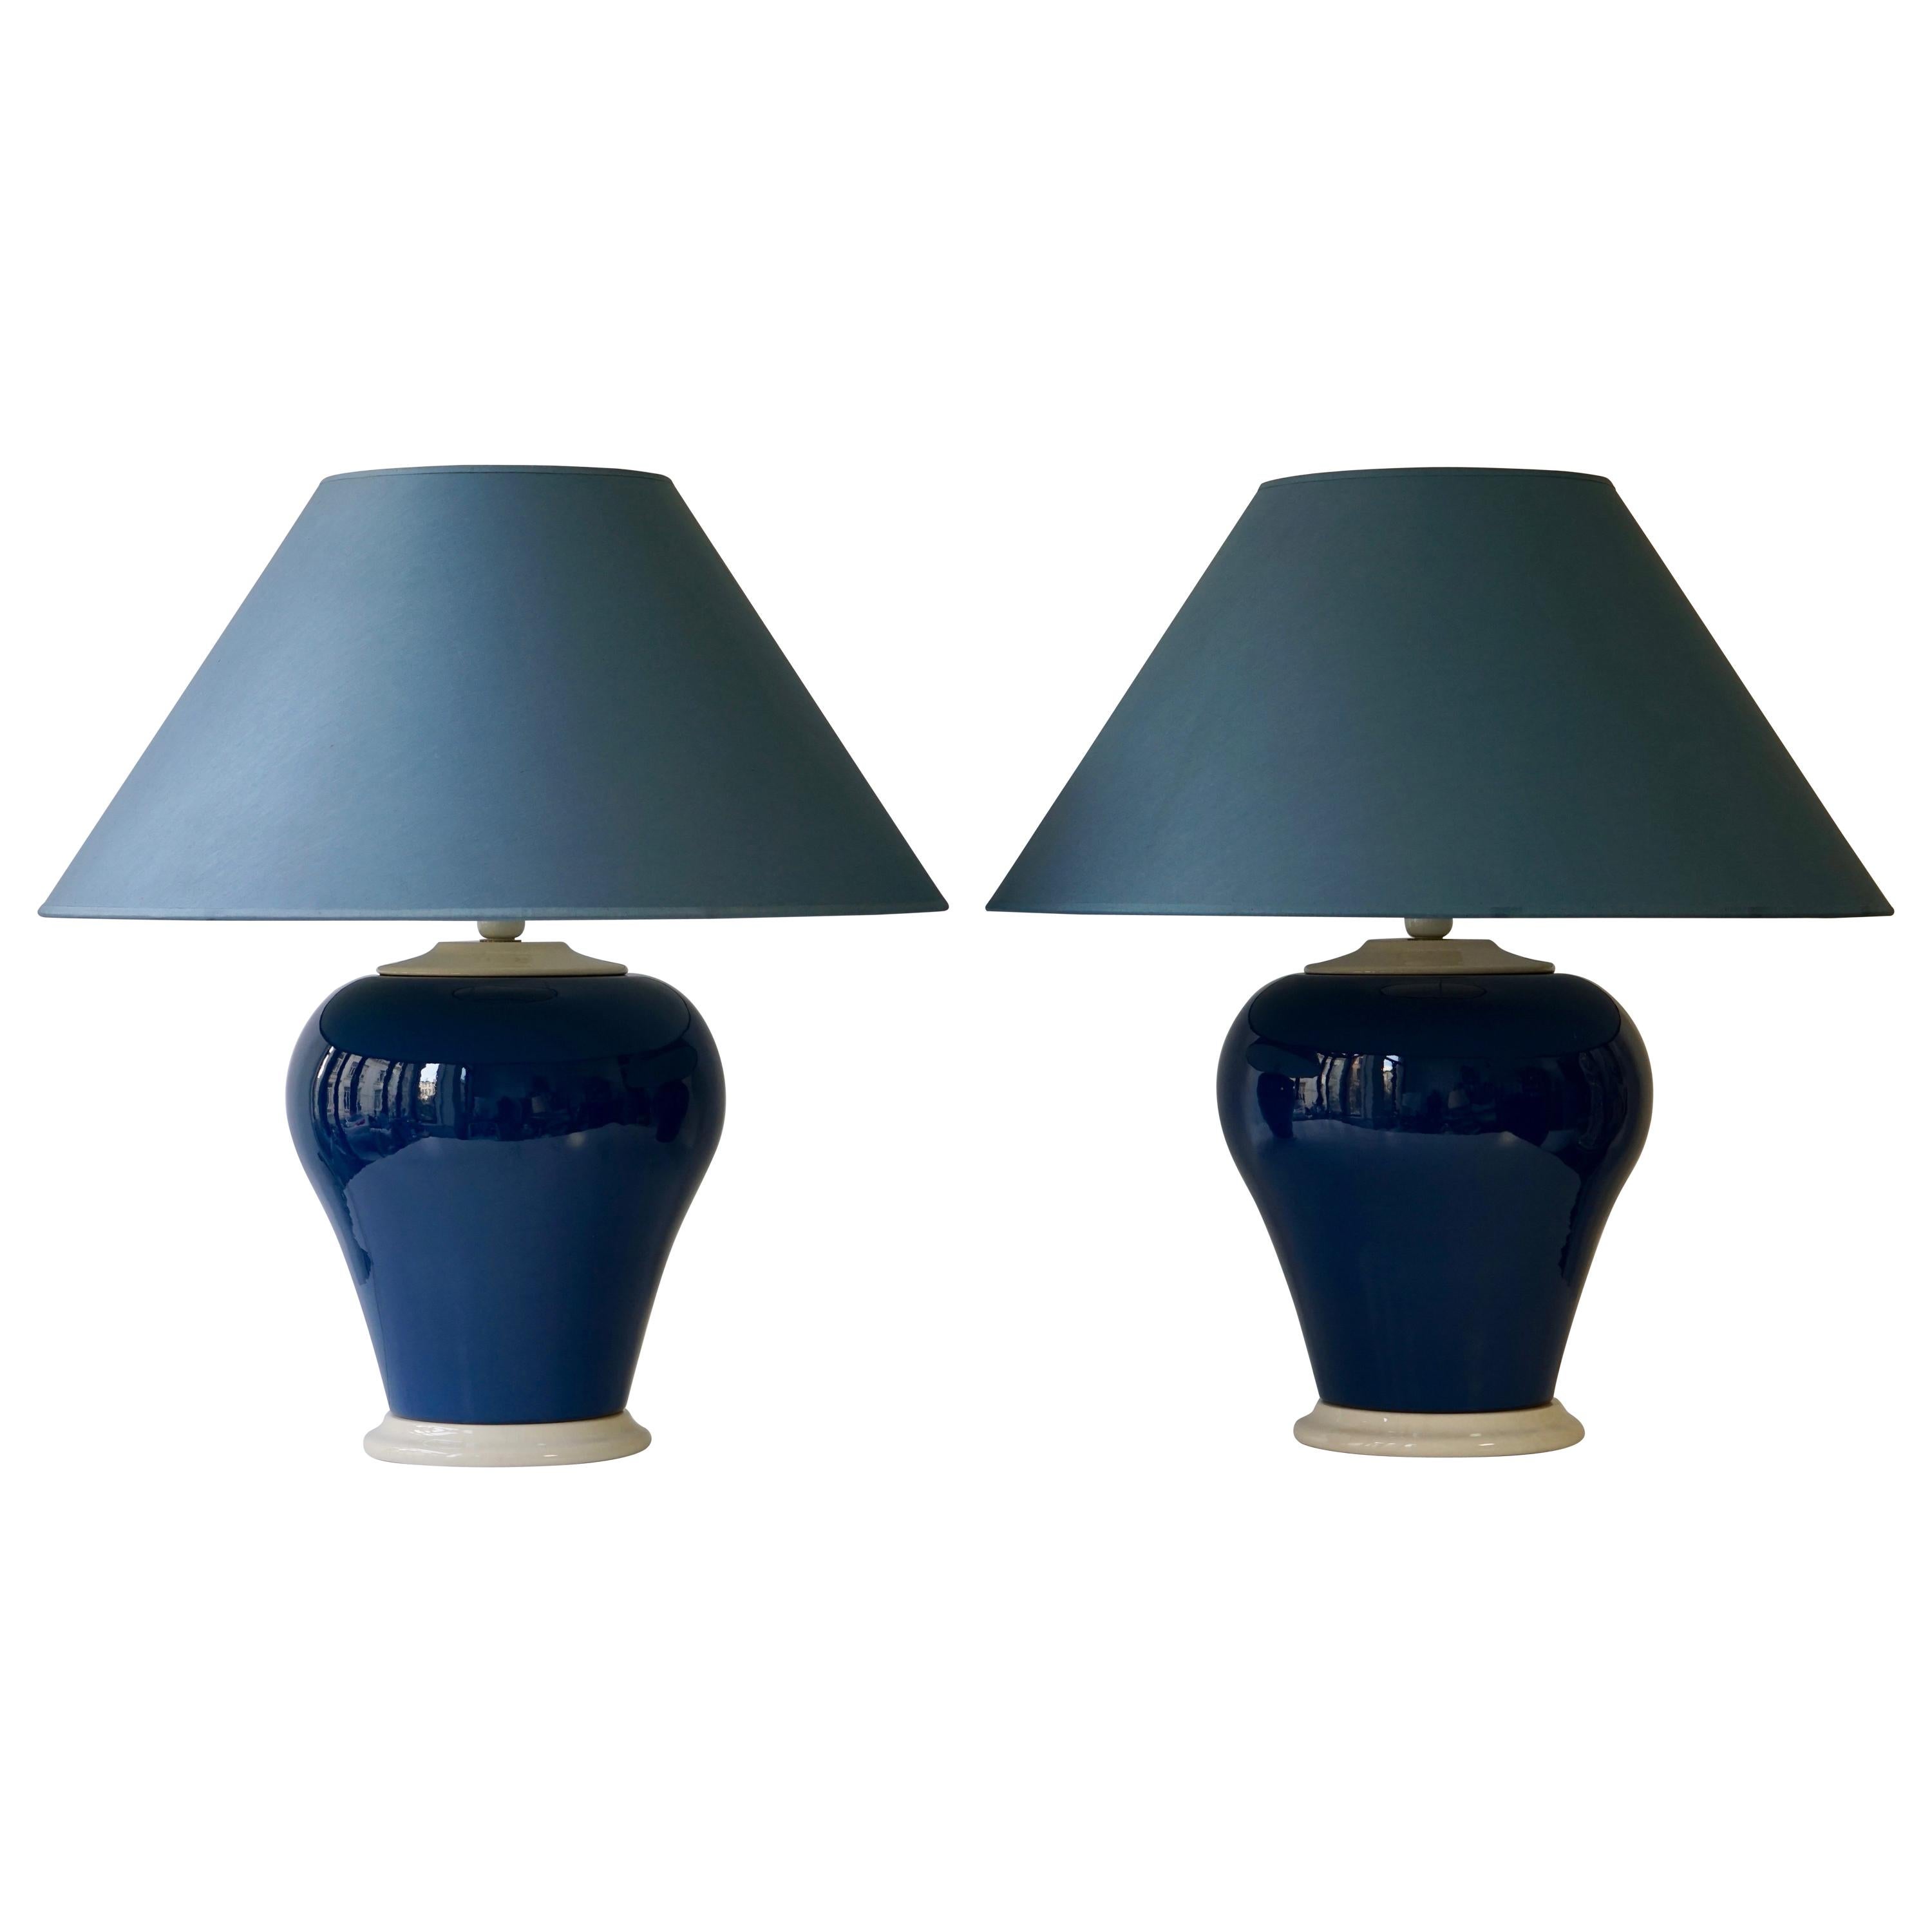 One of Two Ceramic Lamps in White and Blue For Sale